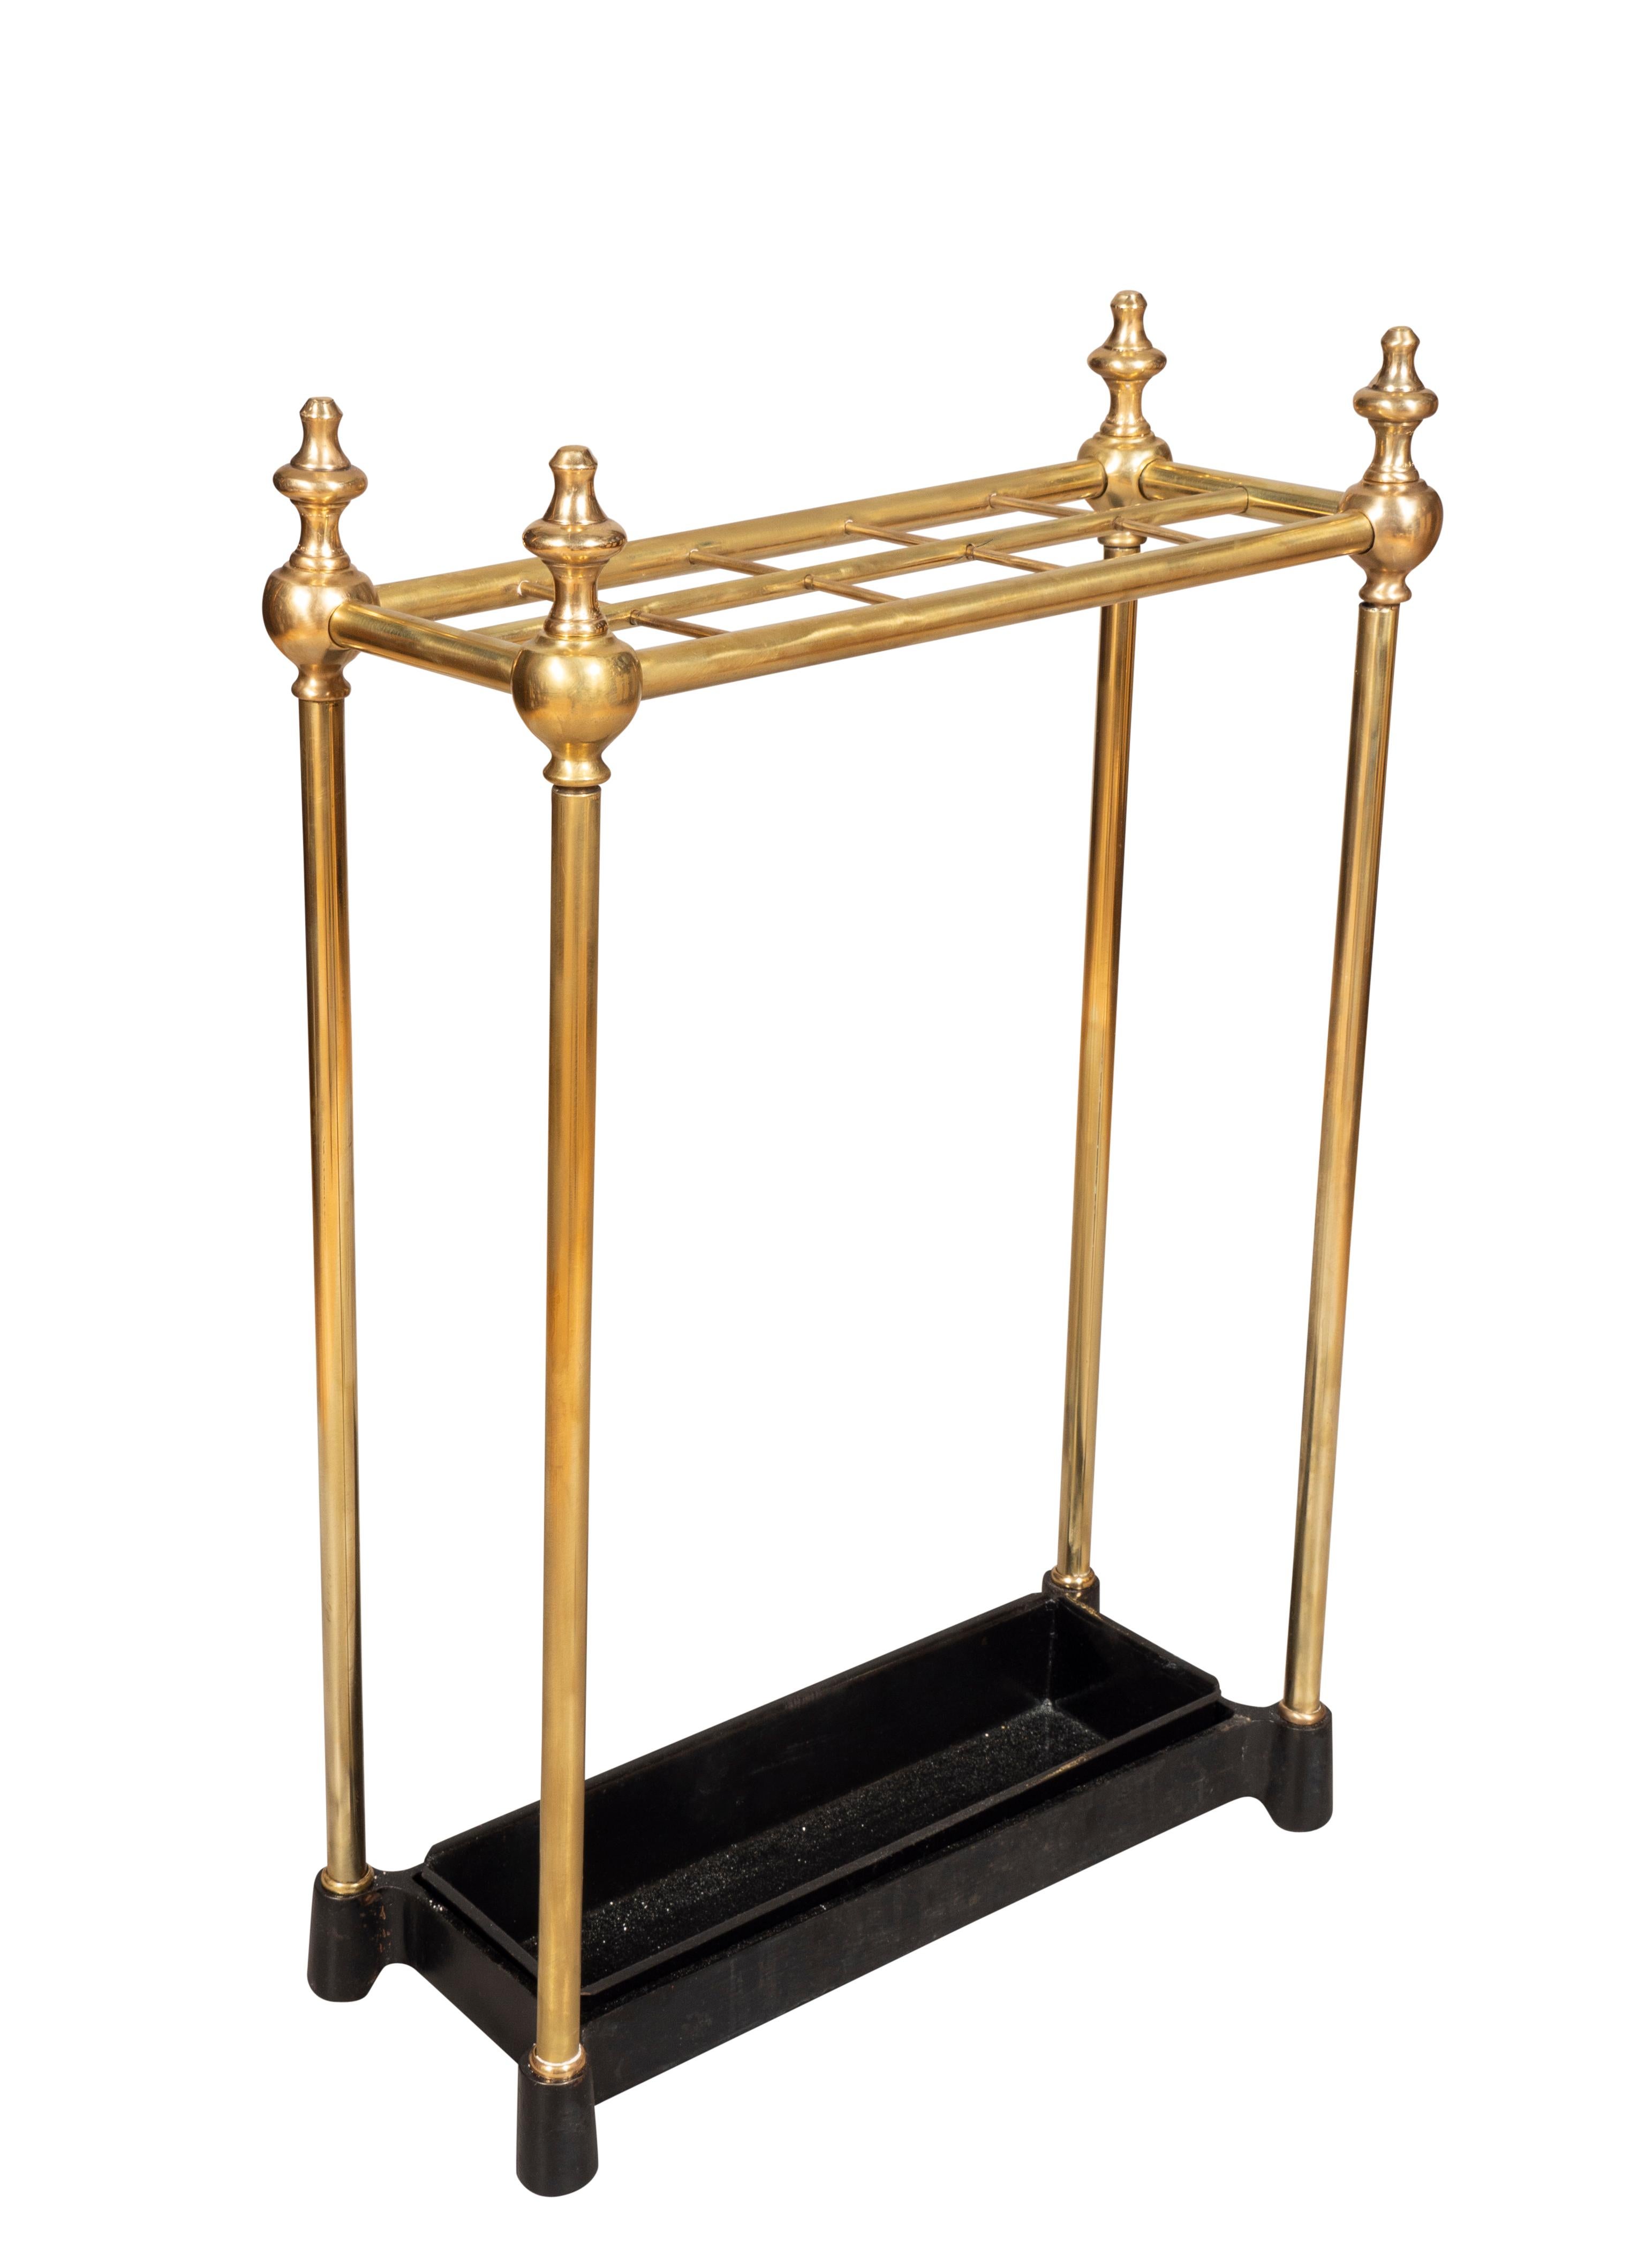 Rectangular with brass finials and sections to hold umbrellas and black iron drip tray. Newly polished and painted.